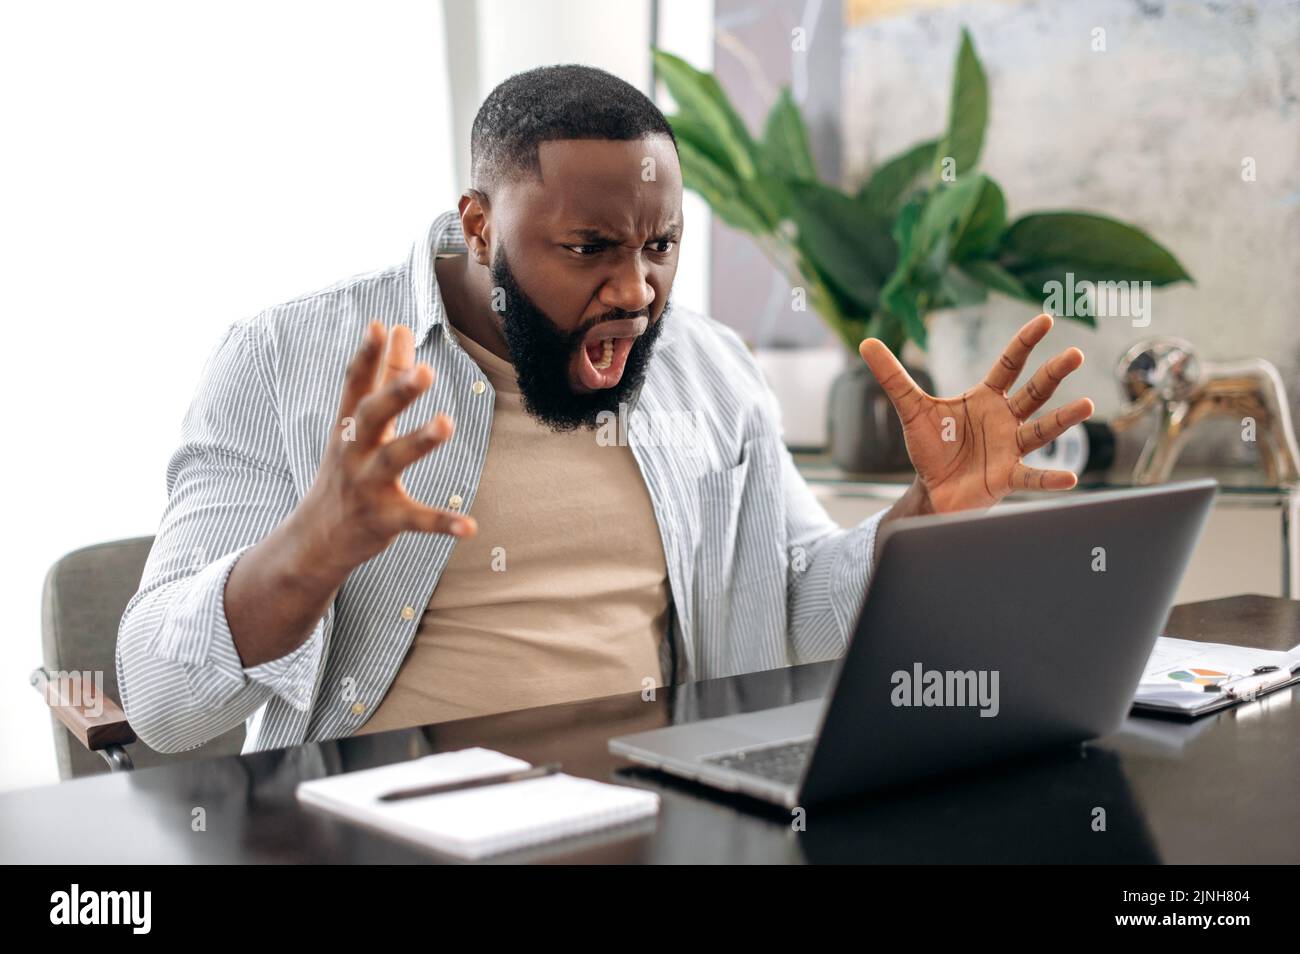 Irritated angry african american man, company worker, freelancer, ceo company, sitting at a desk in modern office, yelling at the laptop, dissatisfied with the result, annoyed emotional state Stock Photo